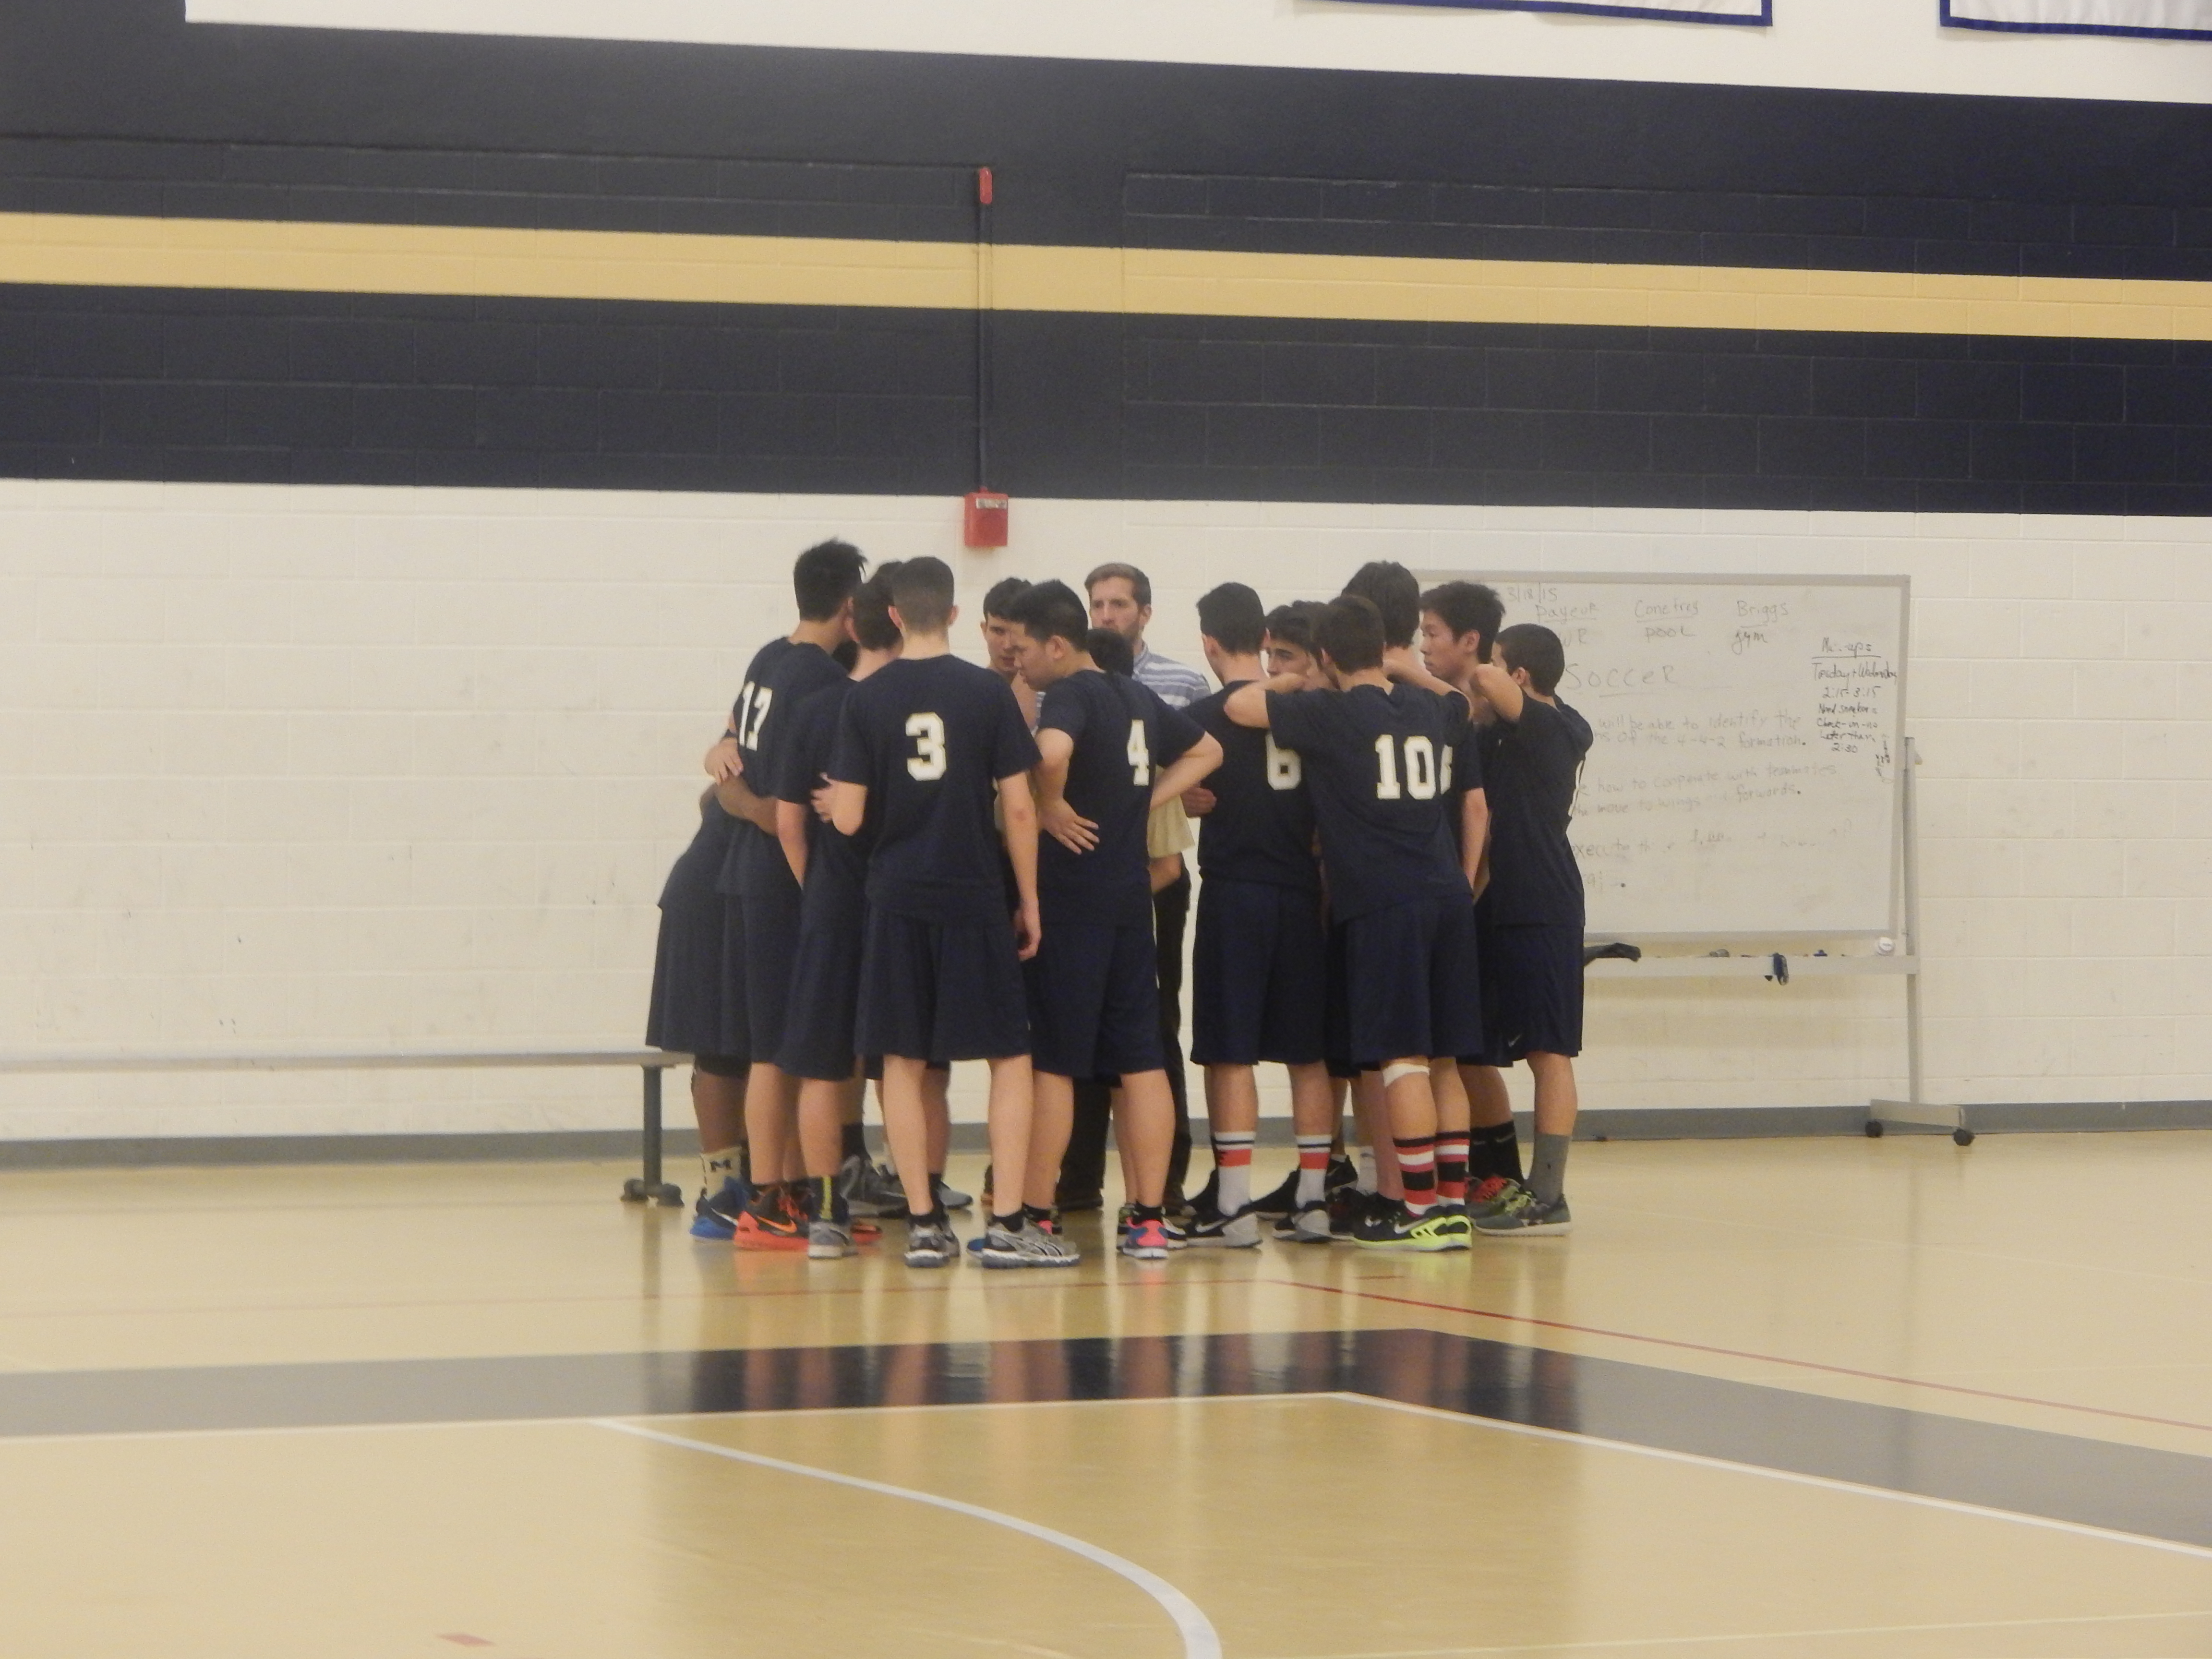 The team huddles before the start of the game. Photo by Meagan Sullivan.